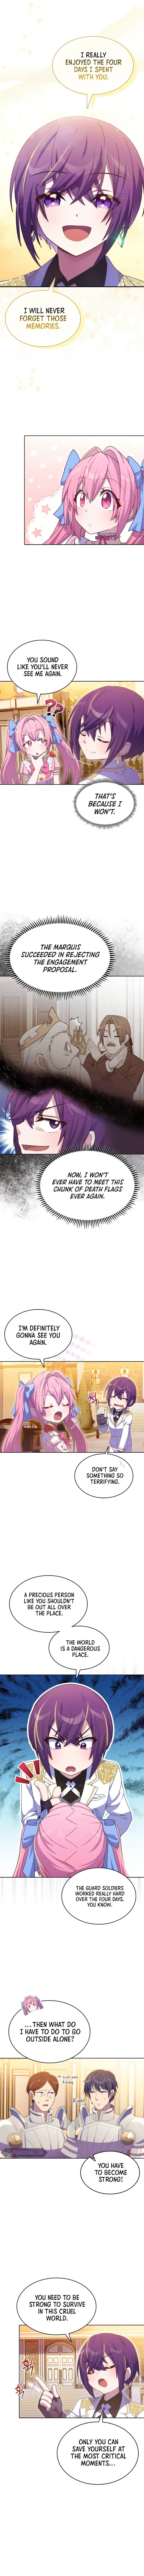 never-die-extra-chap-38-3